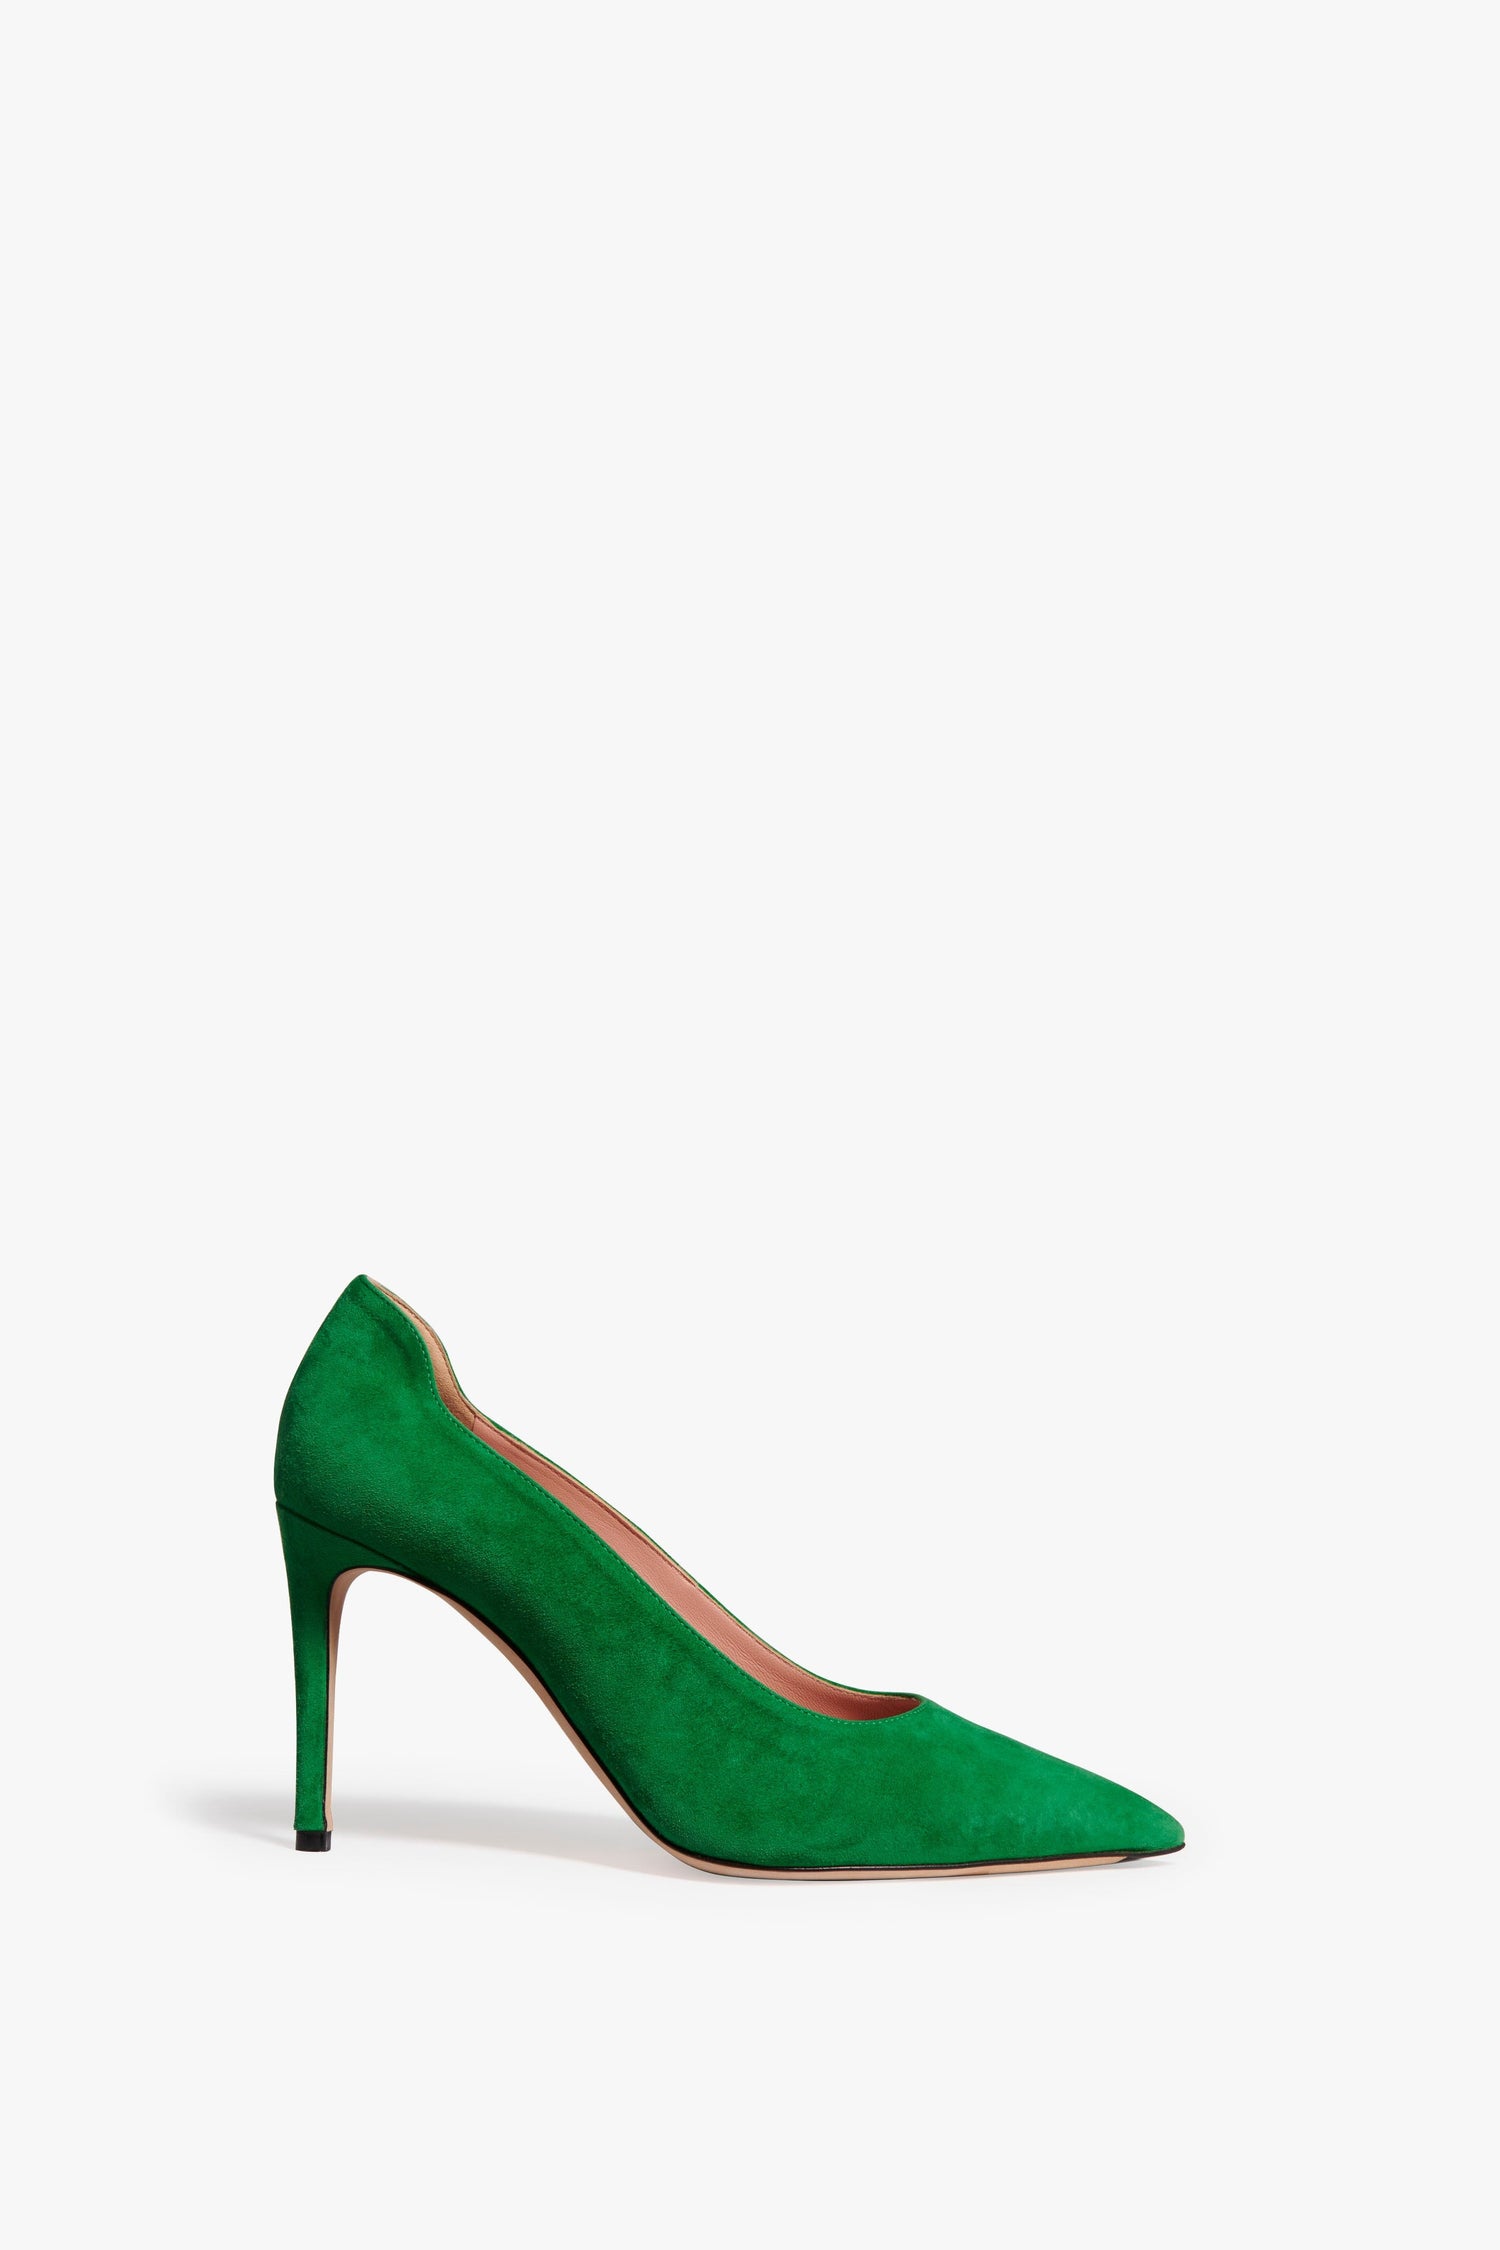 The VB Pump 90 in emerald green suede is finished with a sharp, versatile, thin heel. With a pointed toe design, this classic style is from the Victoria Beckham Footwear collection. The perfect closed-toe, thin heels for work and beyond.